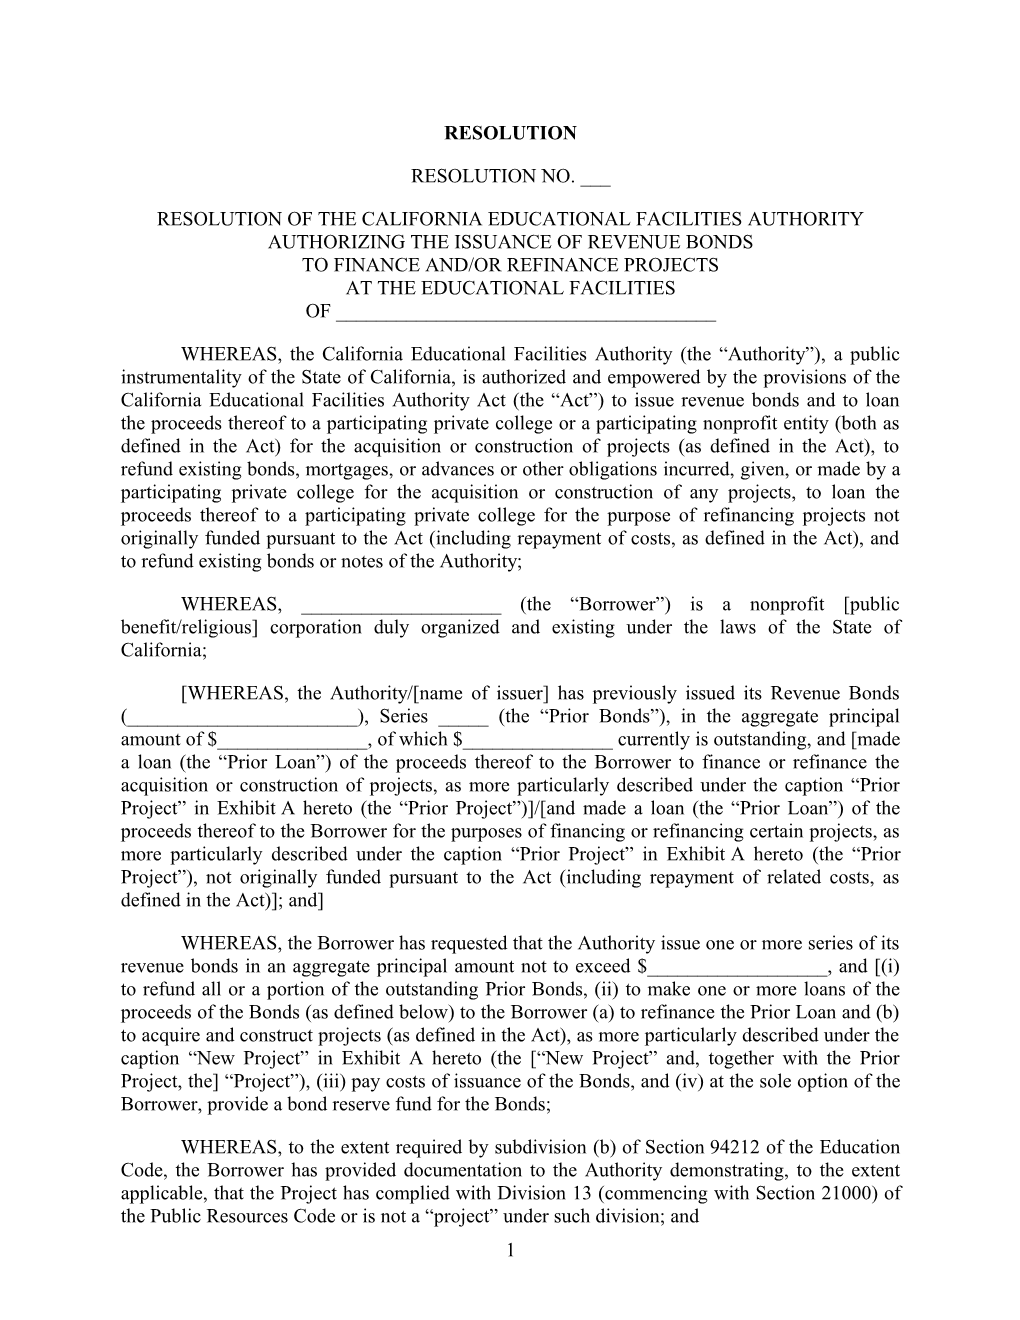 Resolution of the California Educational Facilities Authority Authorizing the Issuance